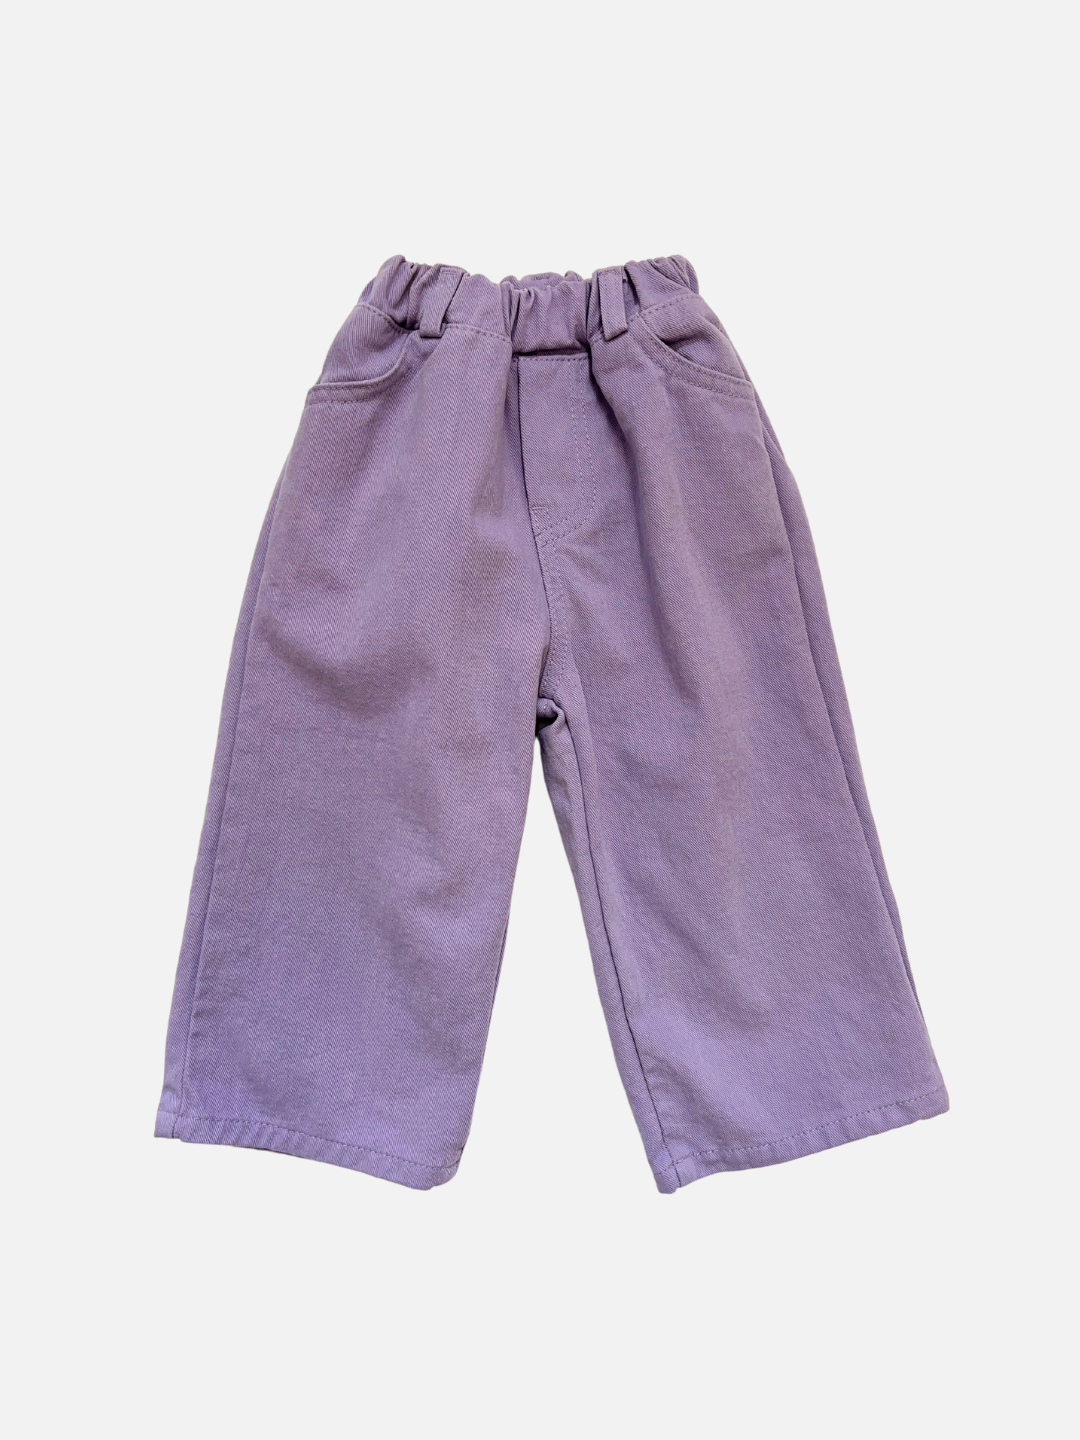 A front view of kid's Grape Jeans with elastic waist